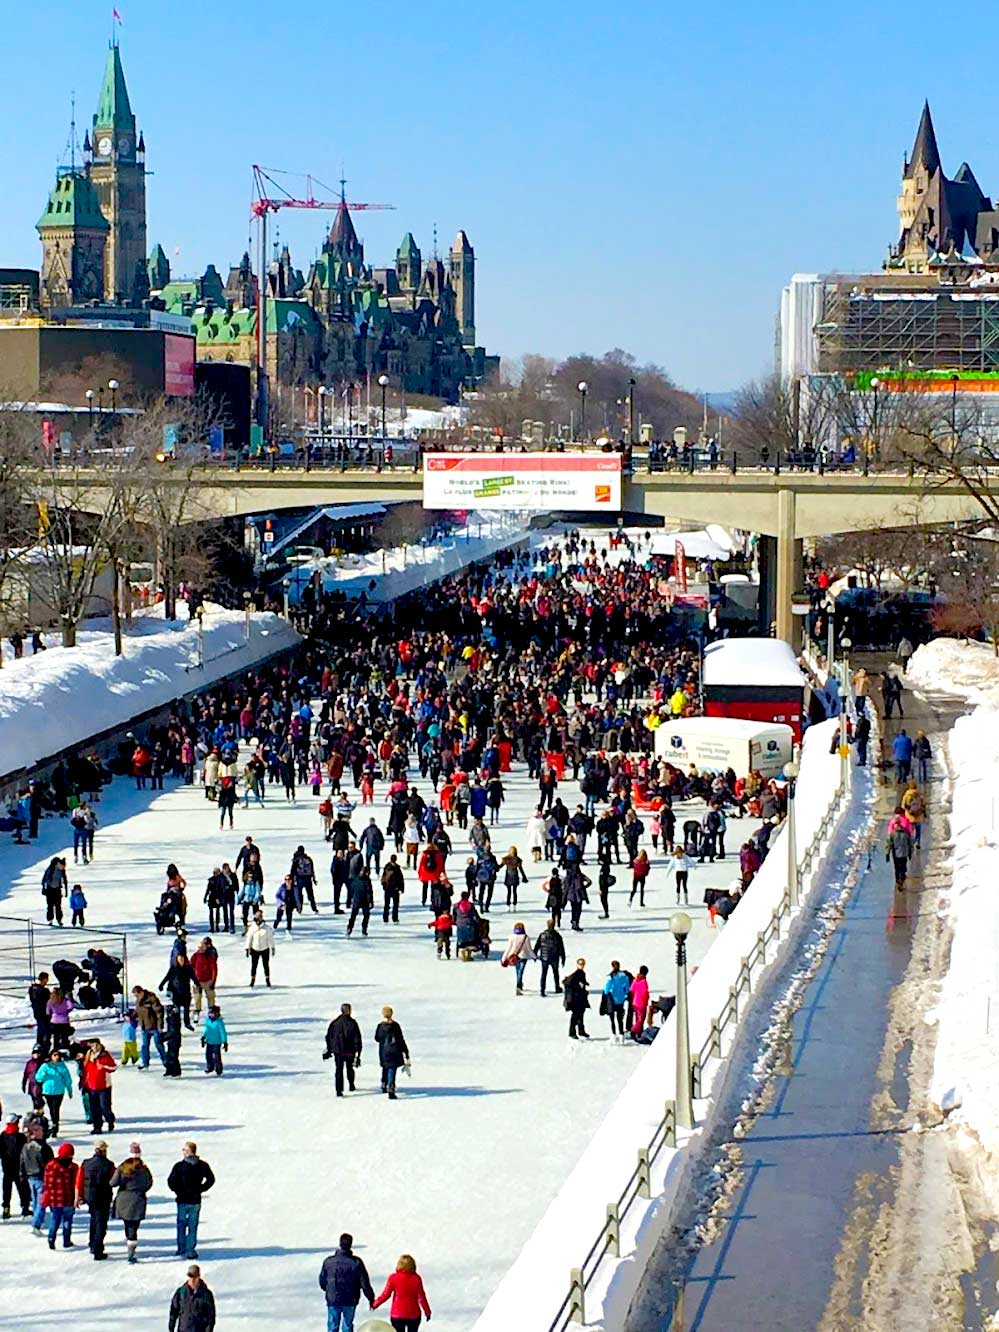 The Top 10 Montreal Winter Festivals To Make The Most Of Winter 2022